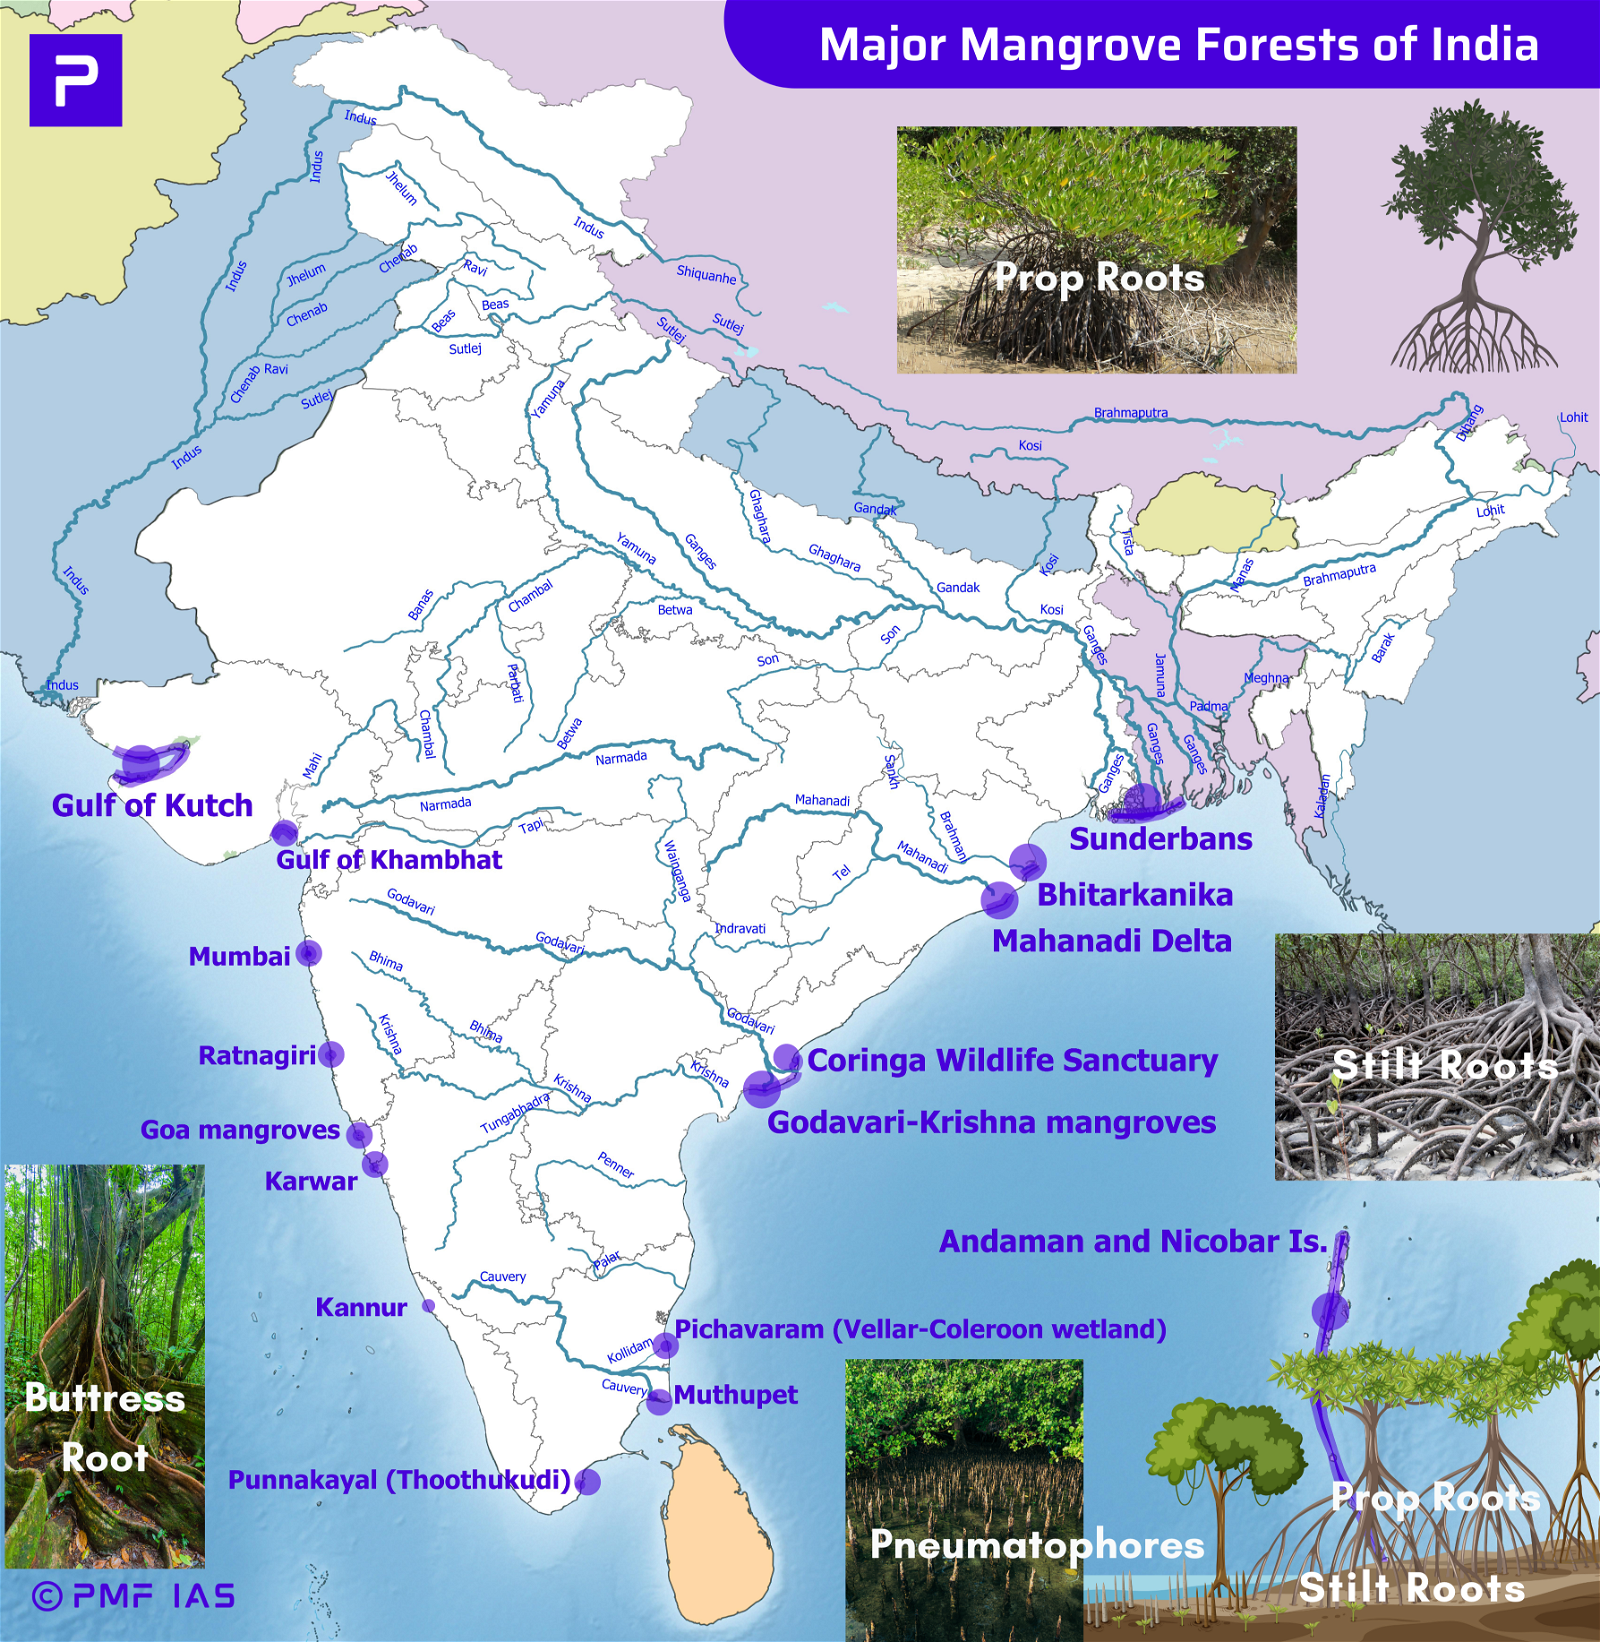 Major Mangeove Forests in India @PMFIAS©